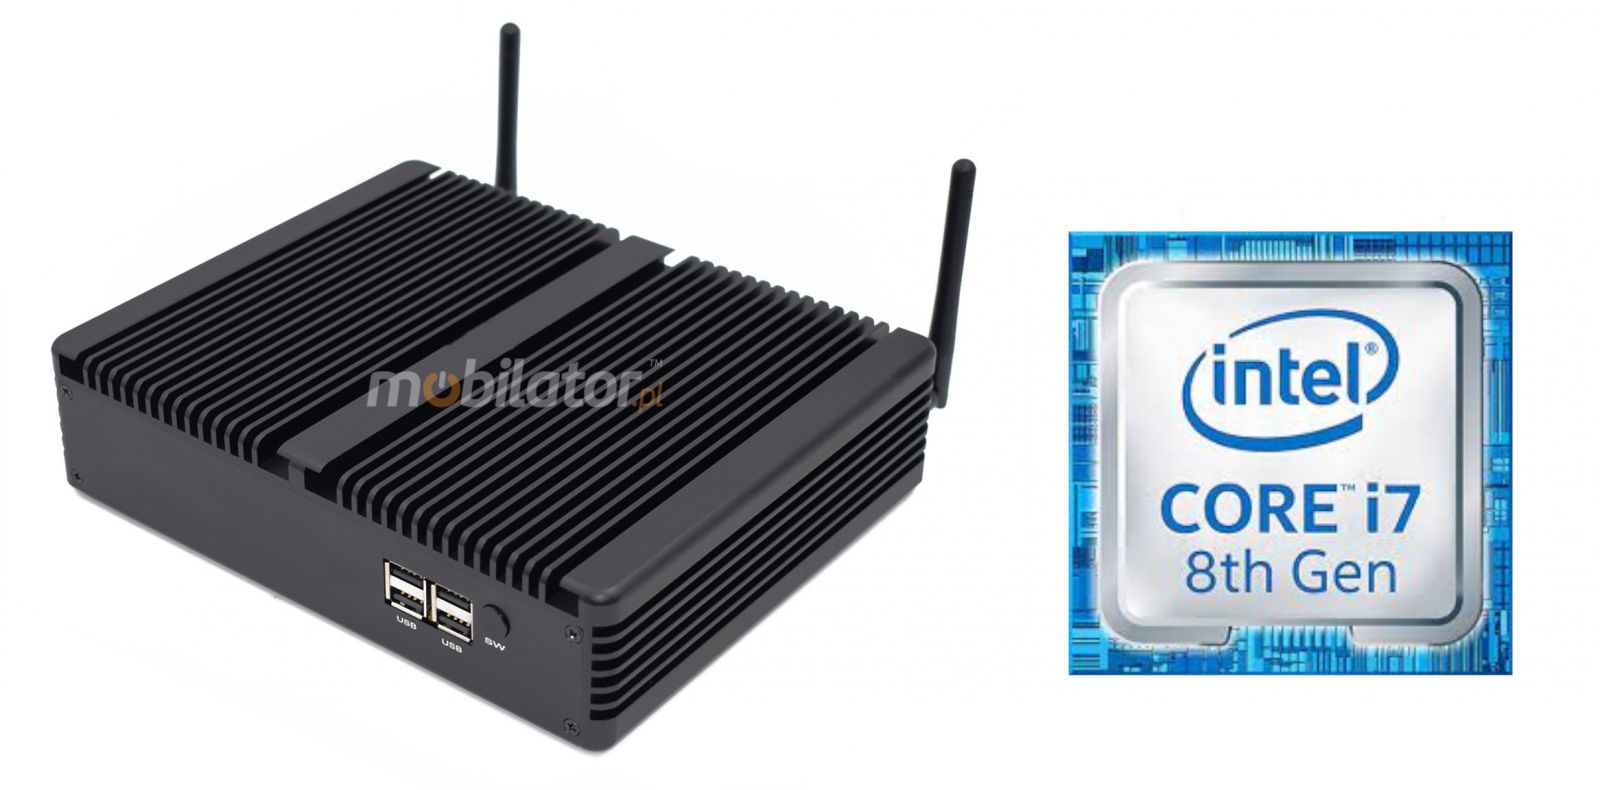 HyBOX TH5 Intel Core i7 a small reliable and fast mini pc with a powerful processor